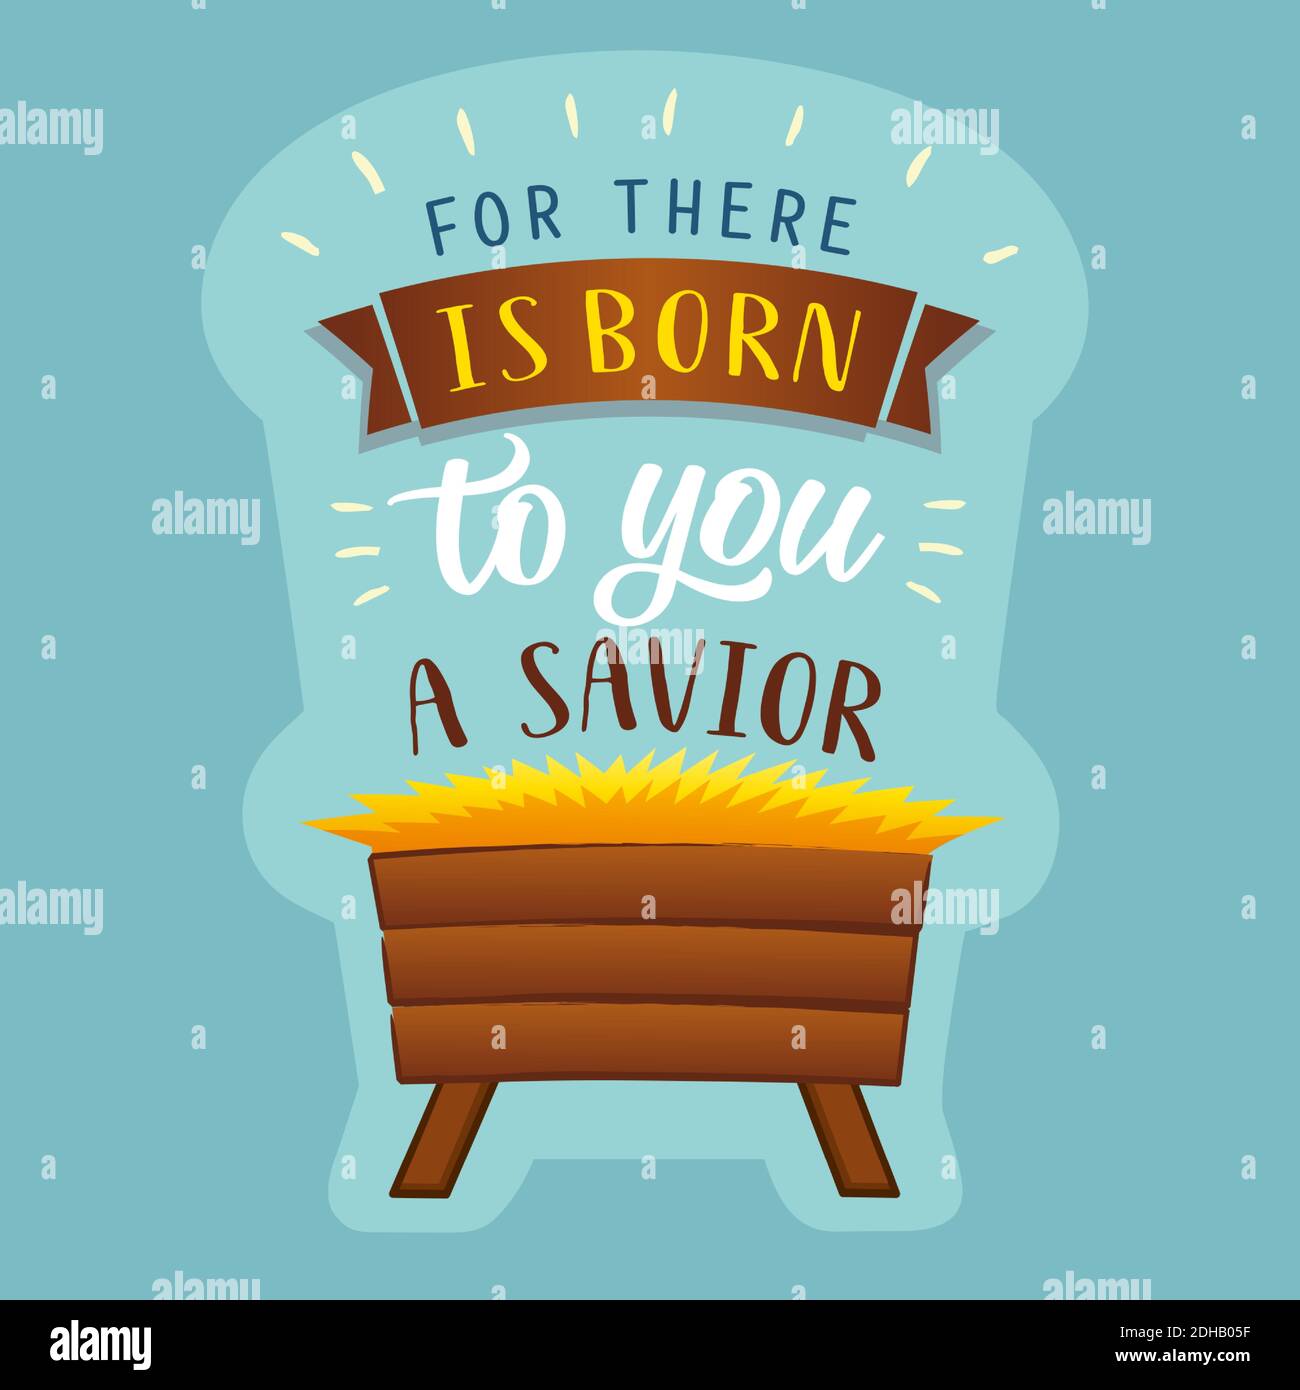 Christian Nativity scene with text: For there is born to you a Savior. Manger for baby Jesus, biblical lettering background. Christmas calligraphy Stock Vector